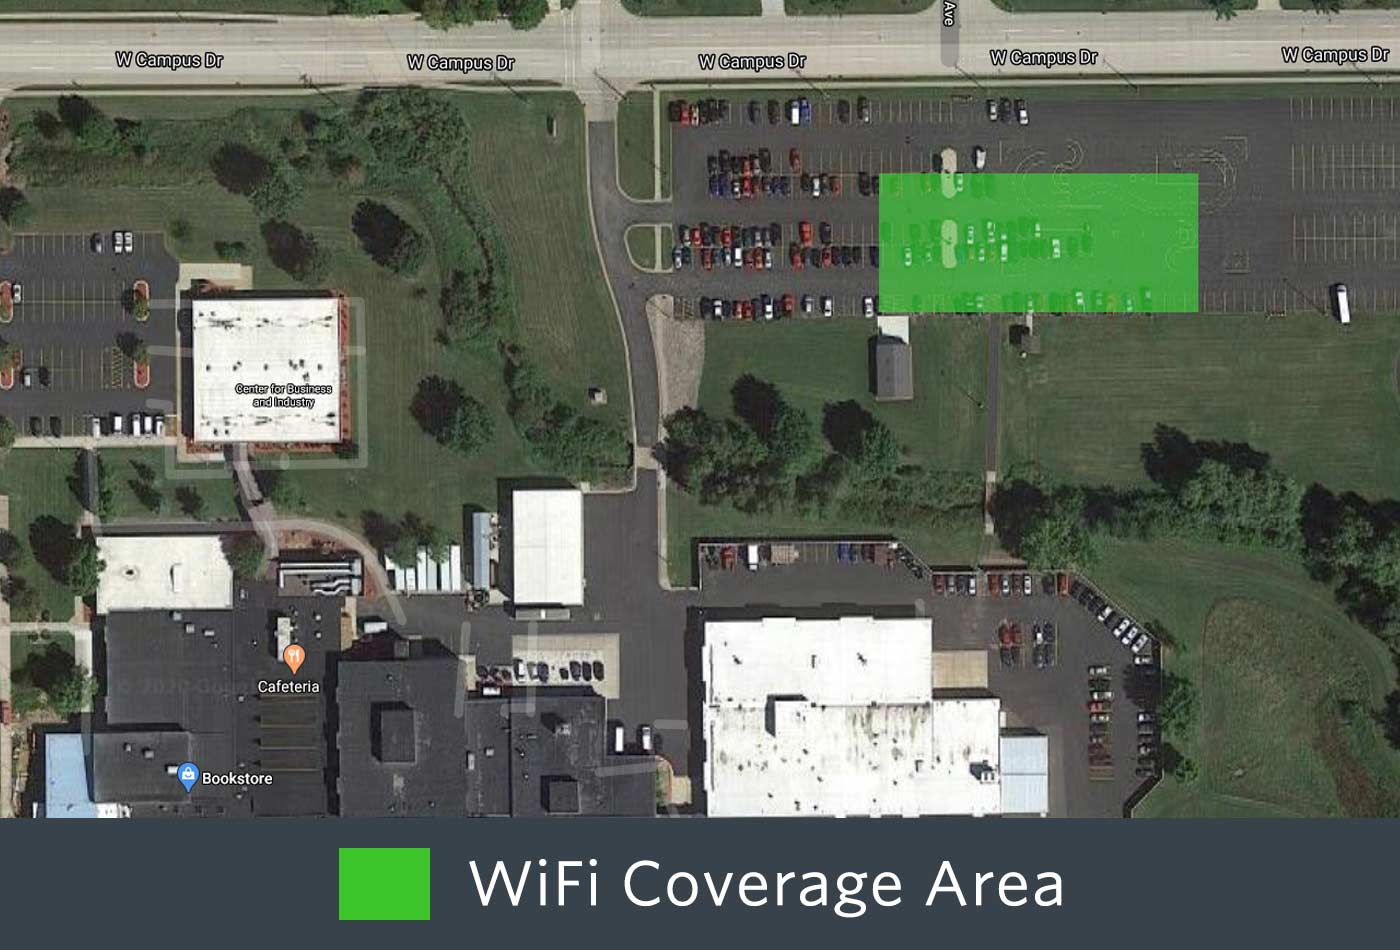 Outdoor WiFi coverage of the back of the Wausau Campus